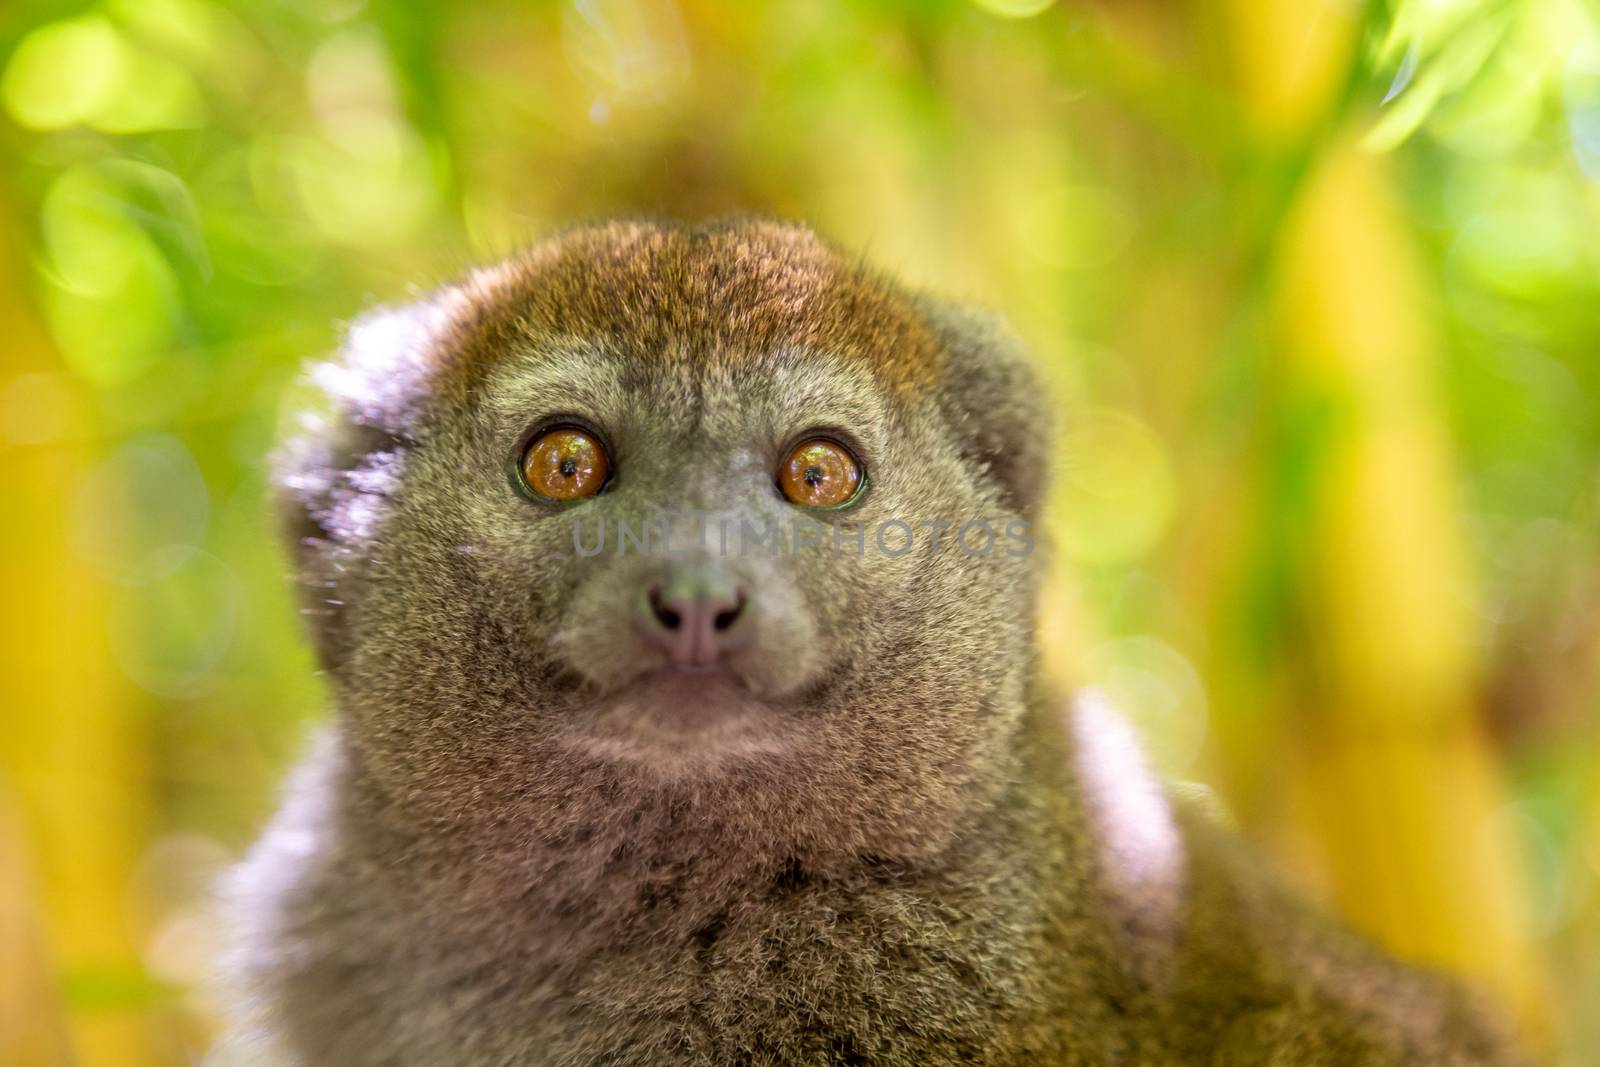 A bamboo lemur sits on a branch and watches the visitors to the national park by 25ehaag6